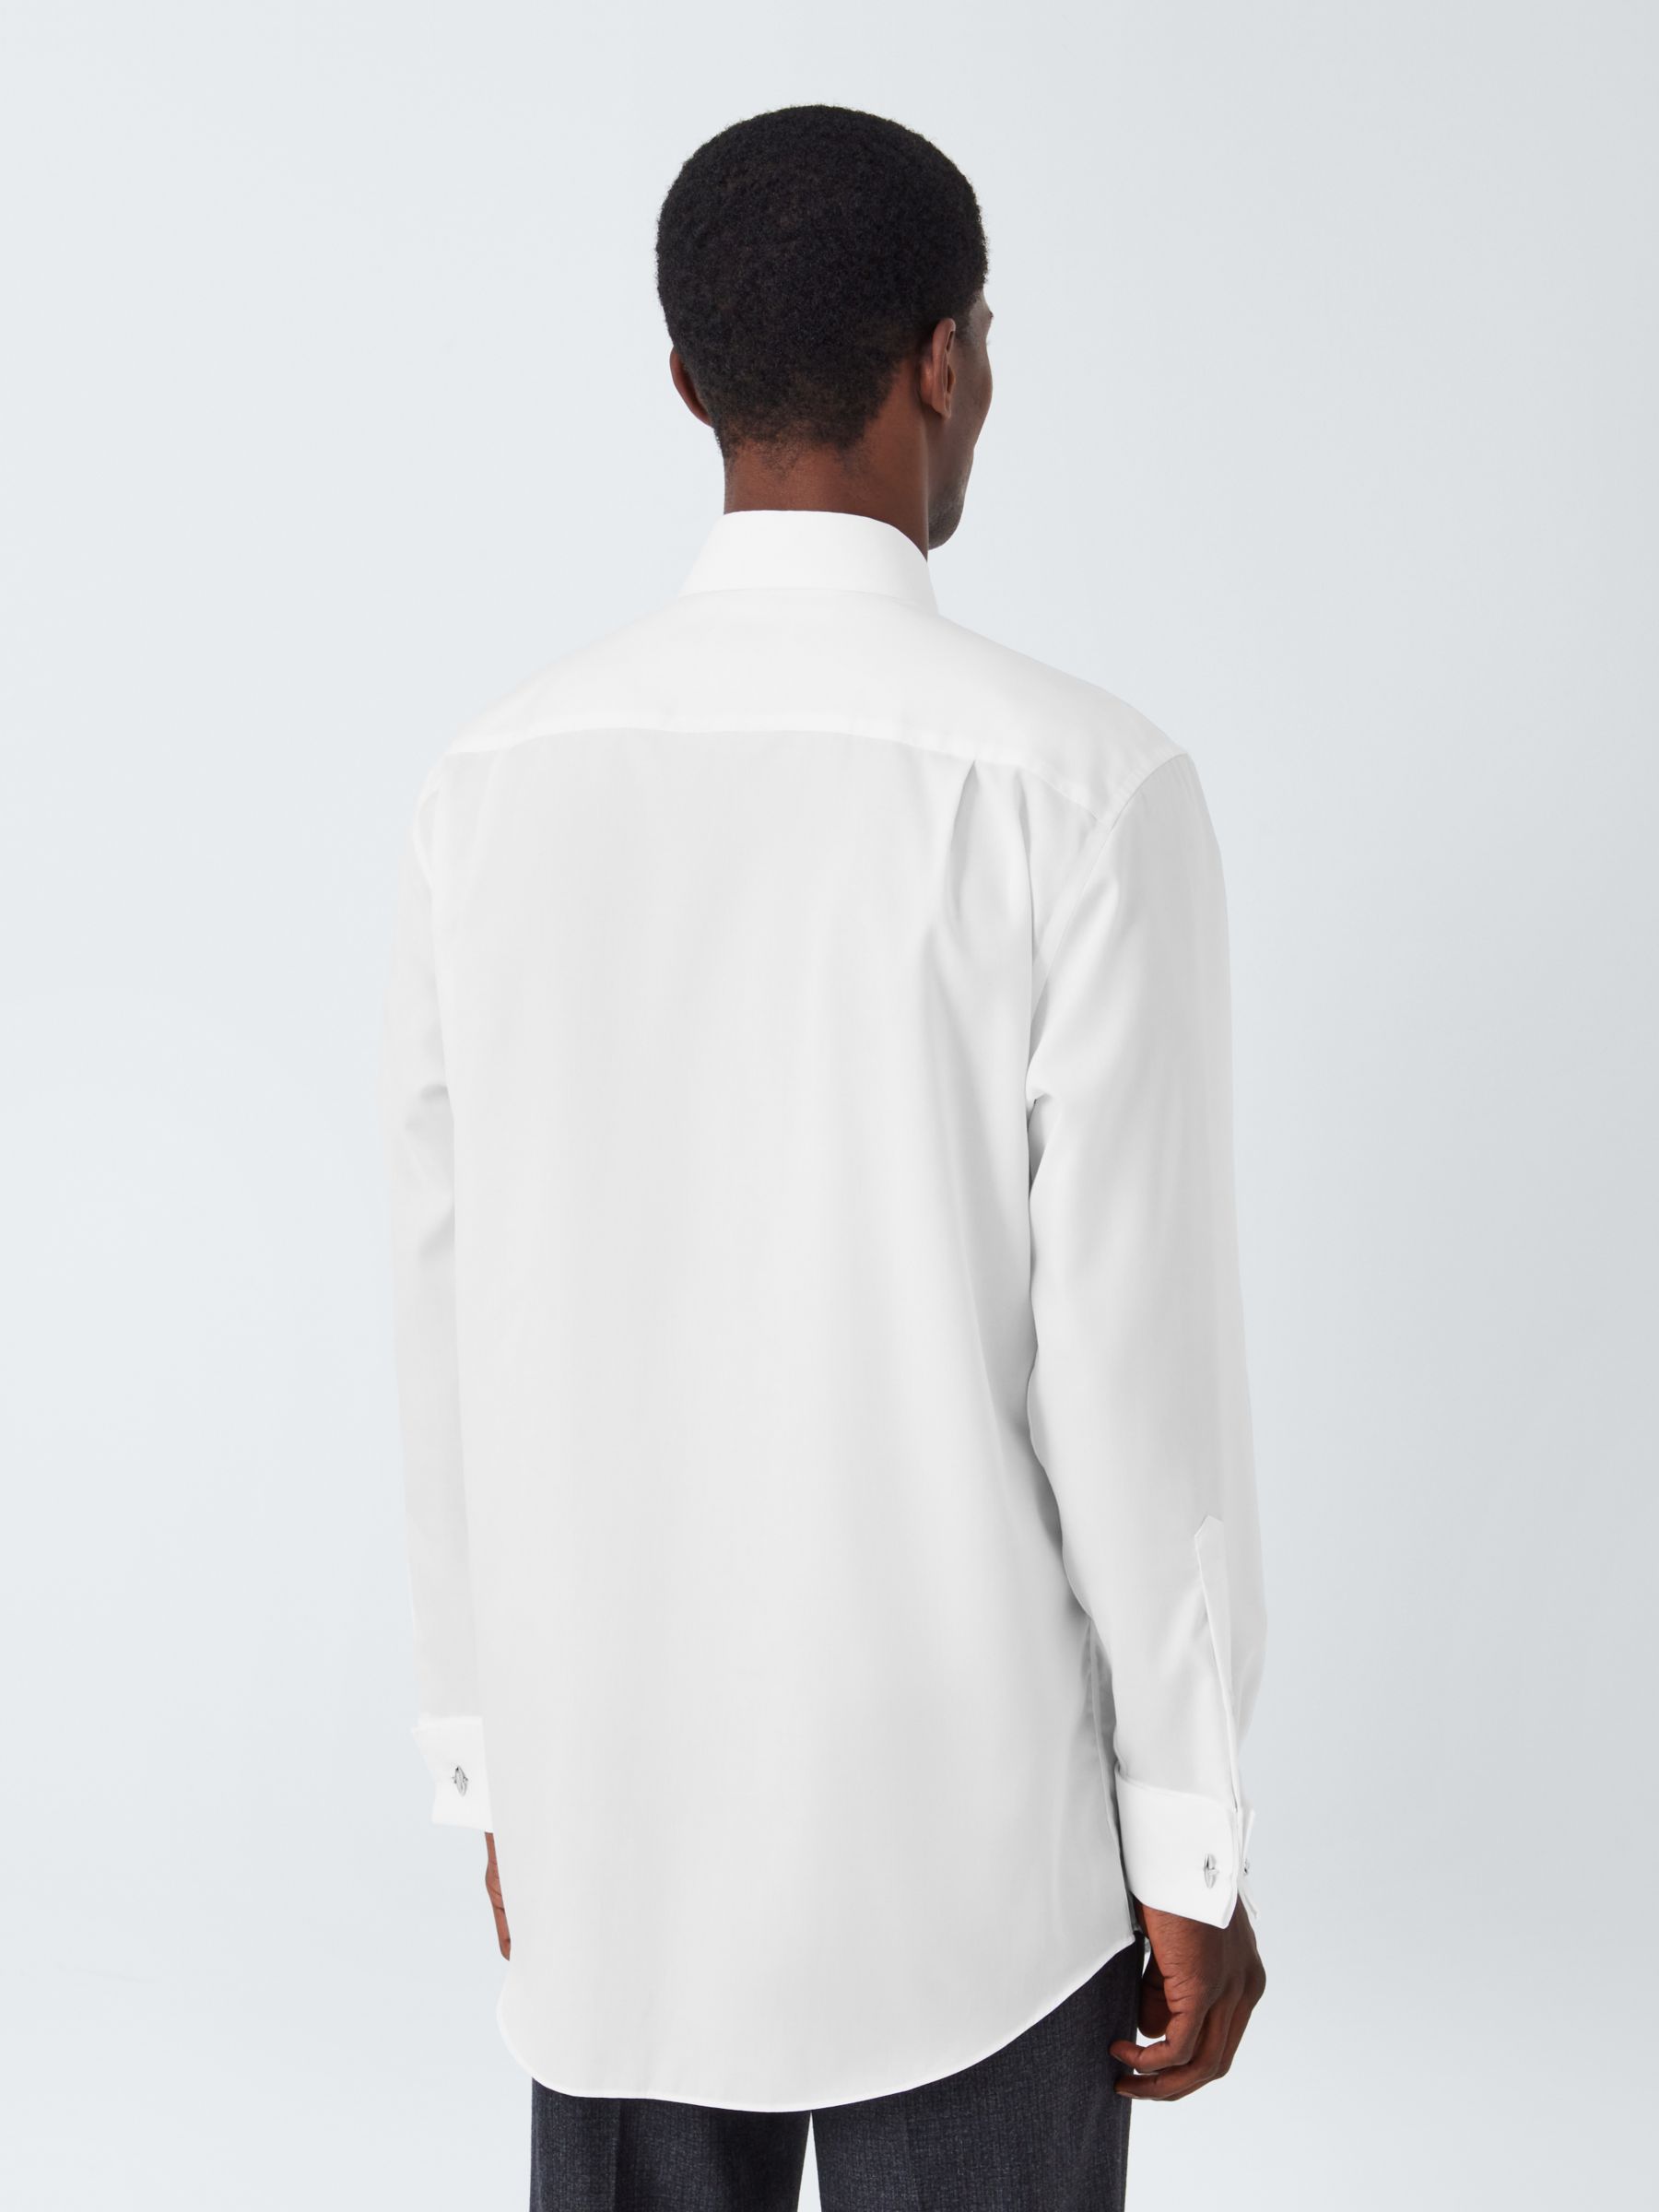 Buy John Lewis Non Iron Twill Regular Fit Double Cuff Shirt Online at johnlewis.com